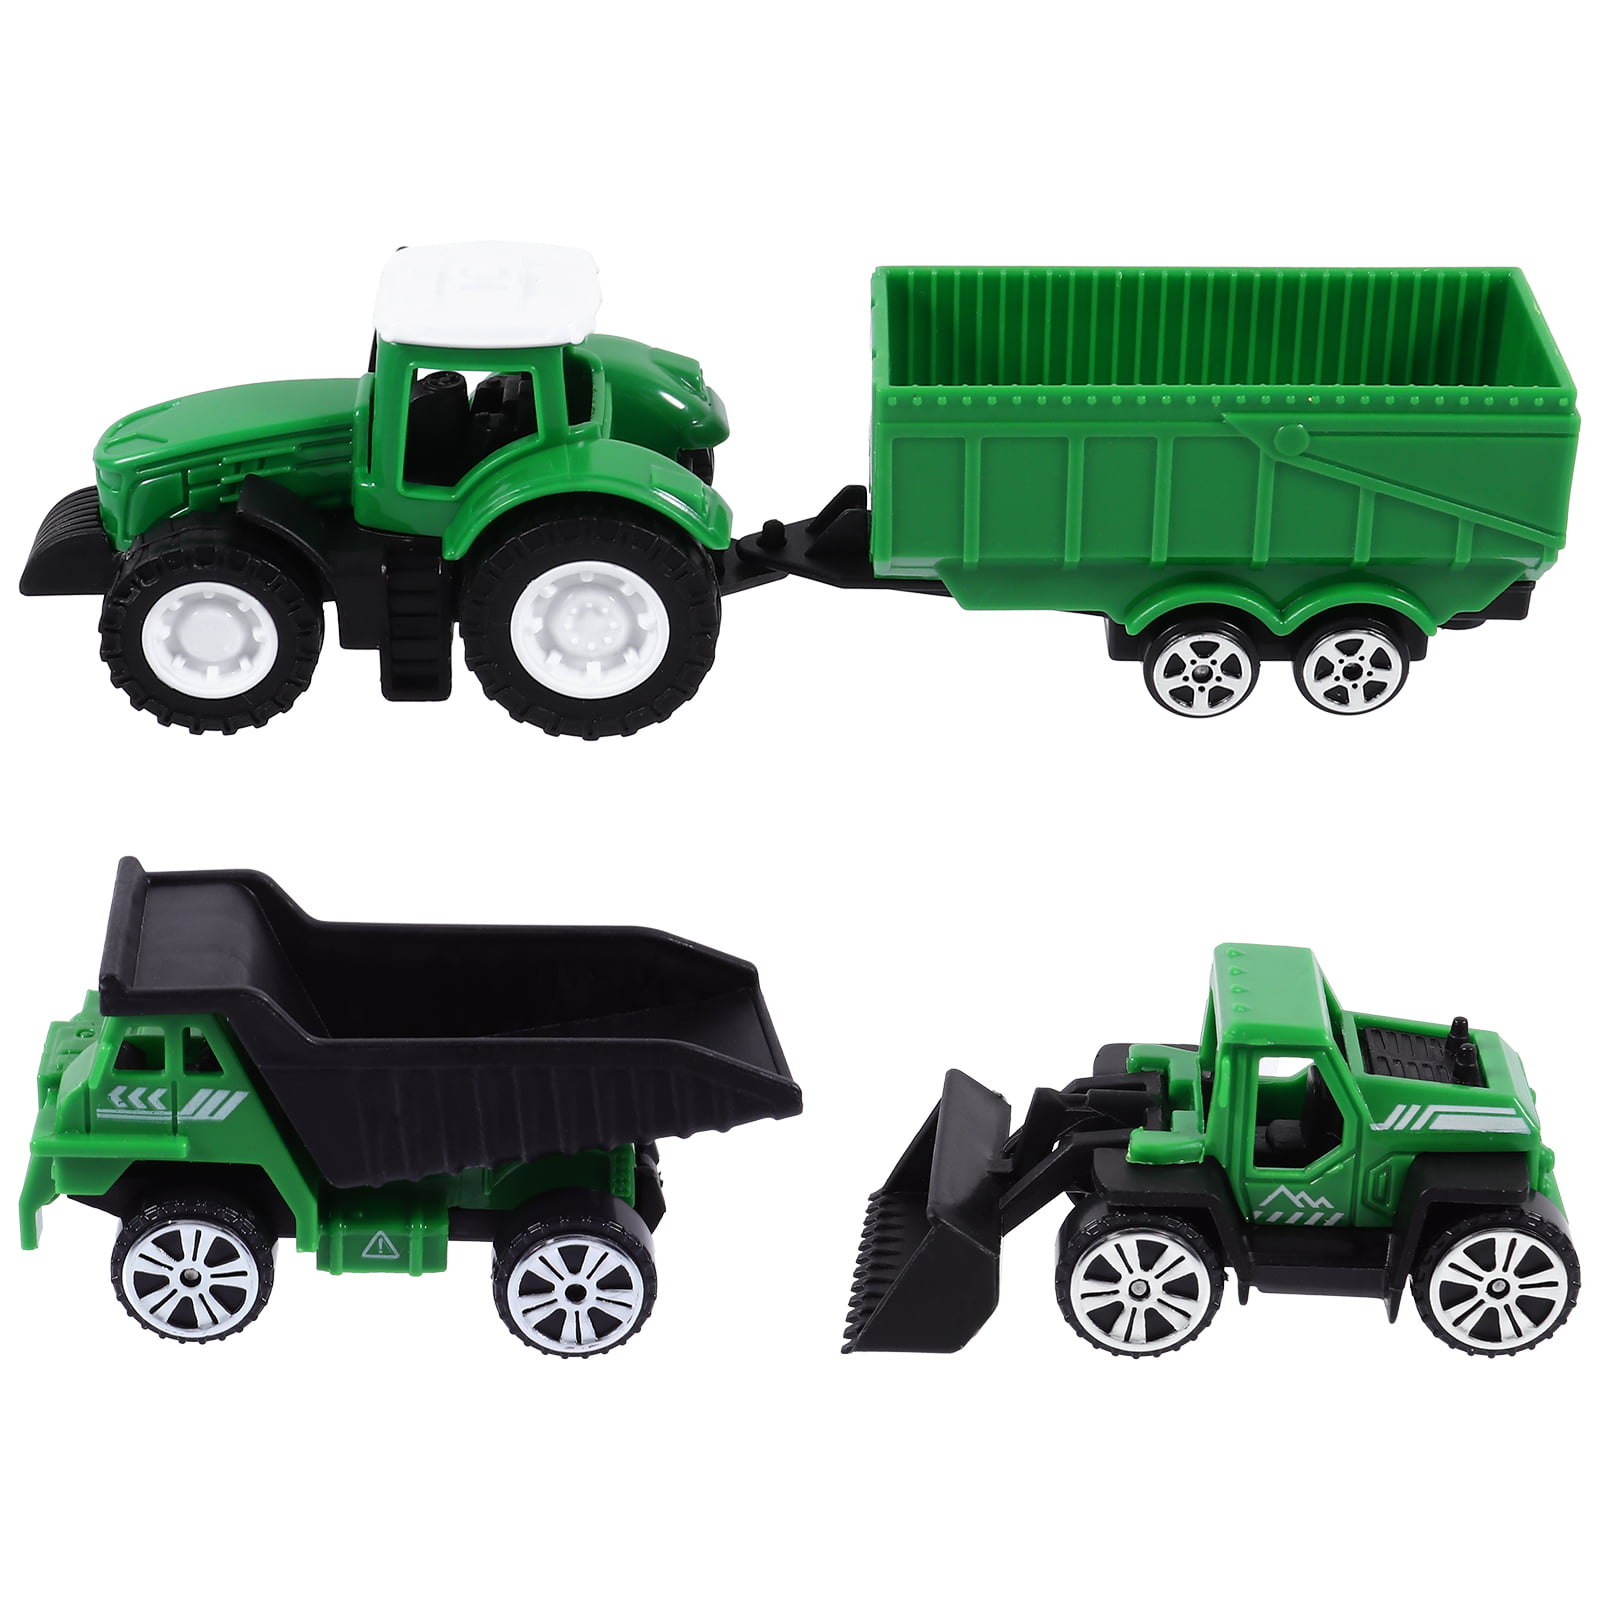 5PCS Dreamon Colourful Construction Trucks Toy Engineering Diggers and Dumpers Toys Cars Play Set Educational Gift for 3 Years Old Kids 